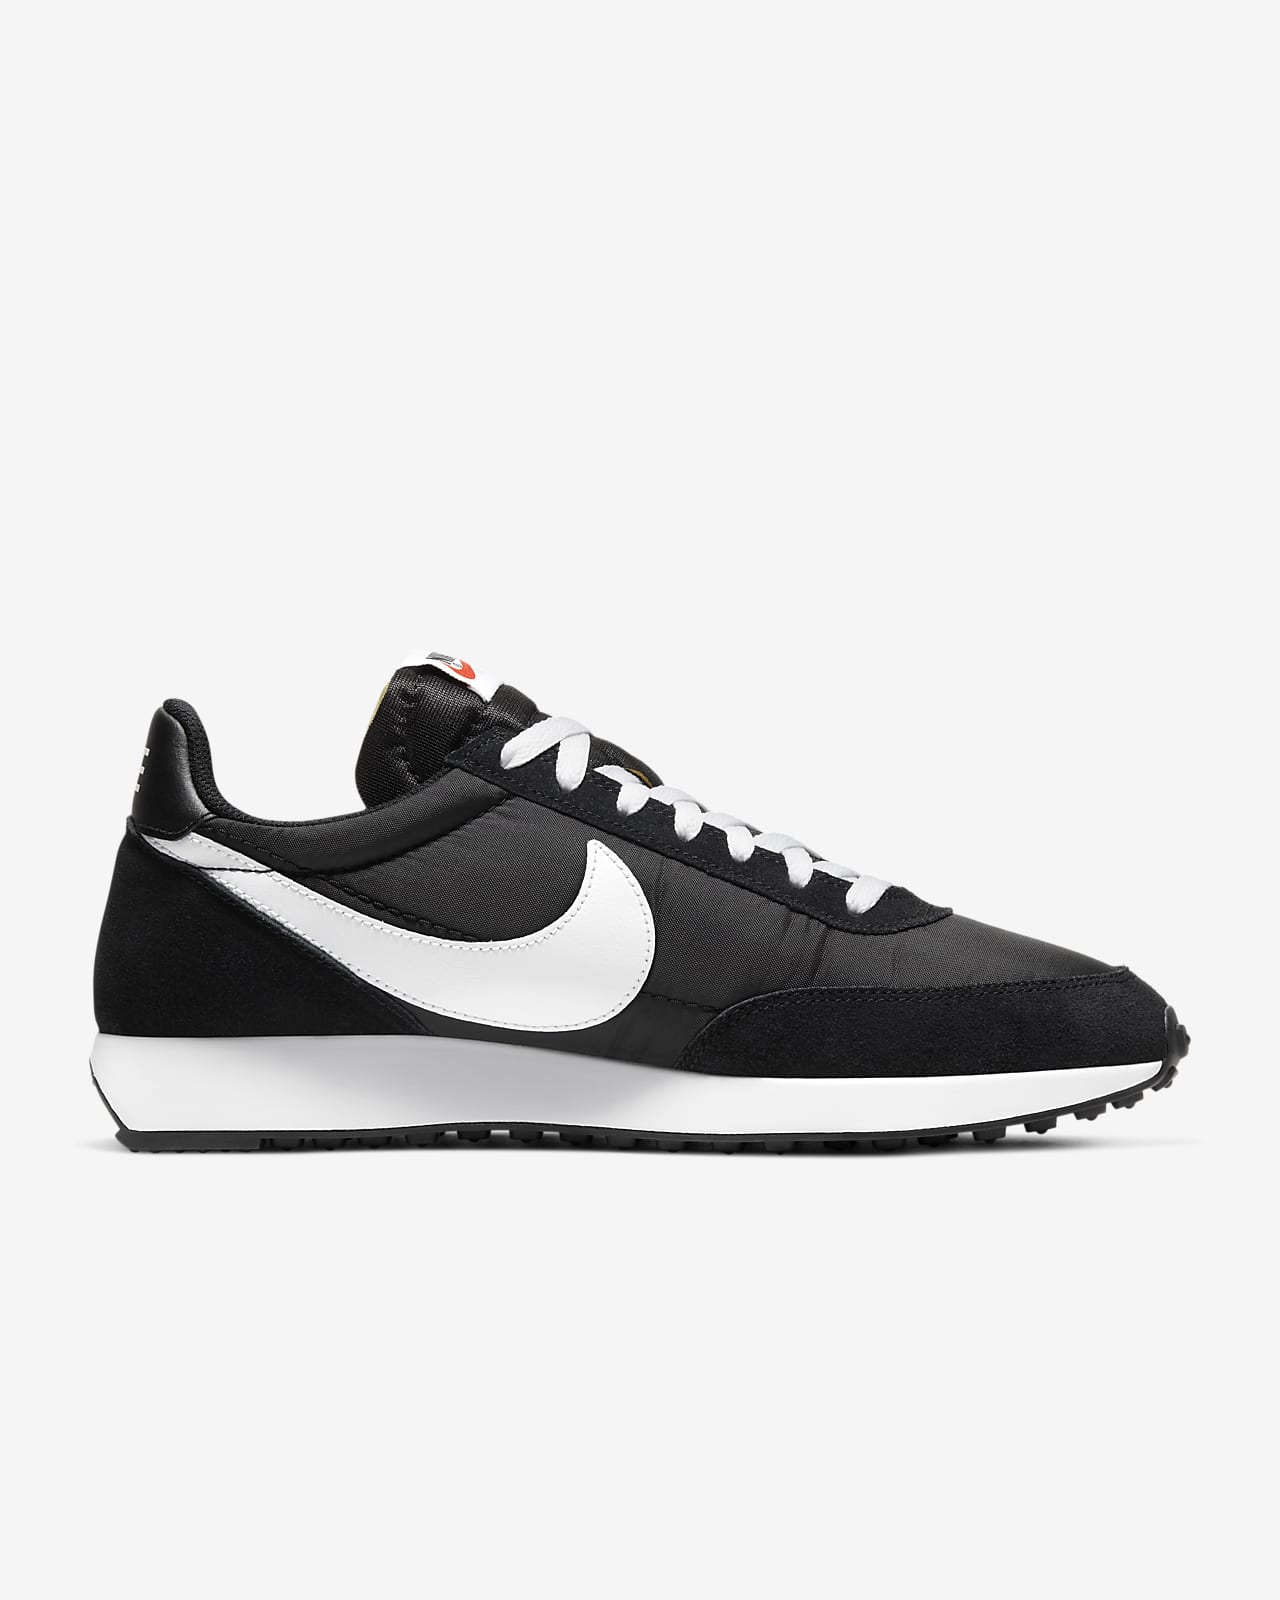 nike air tailwind size